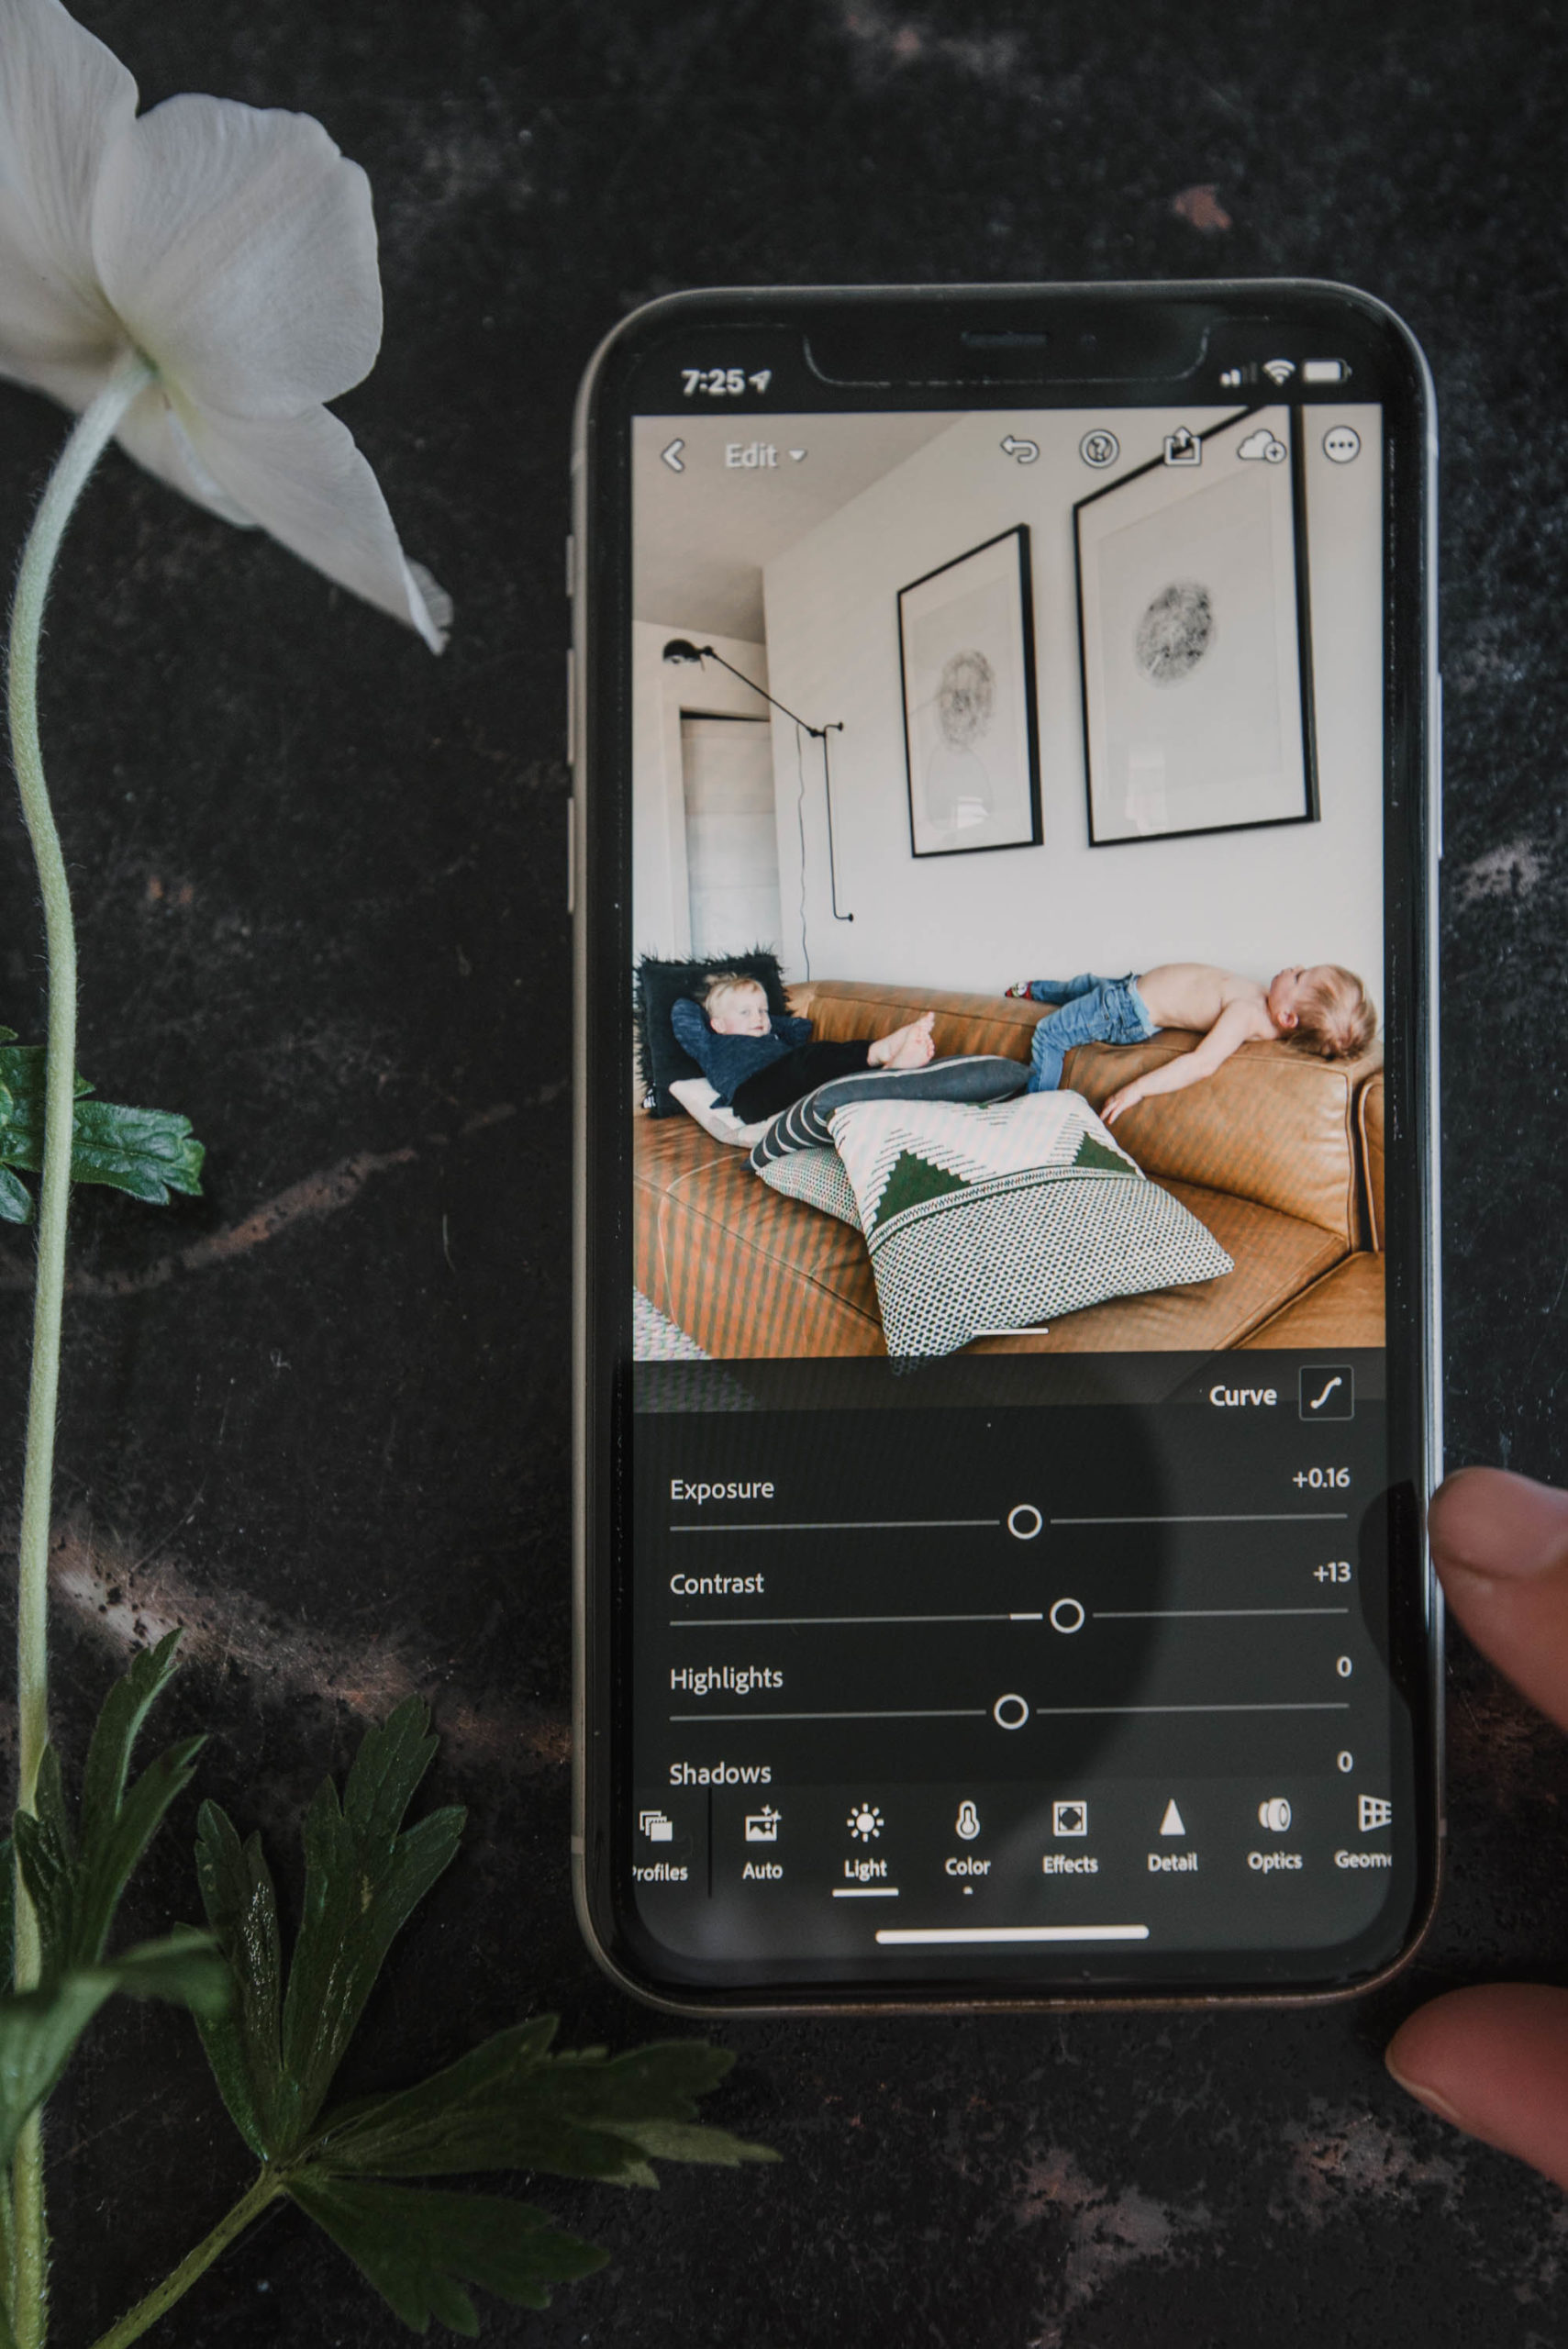 How to edit photos on your phone